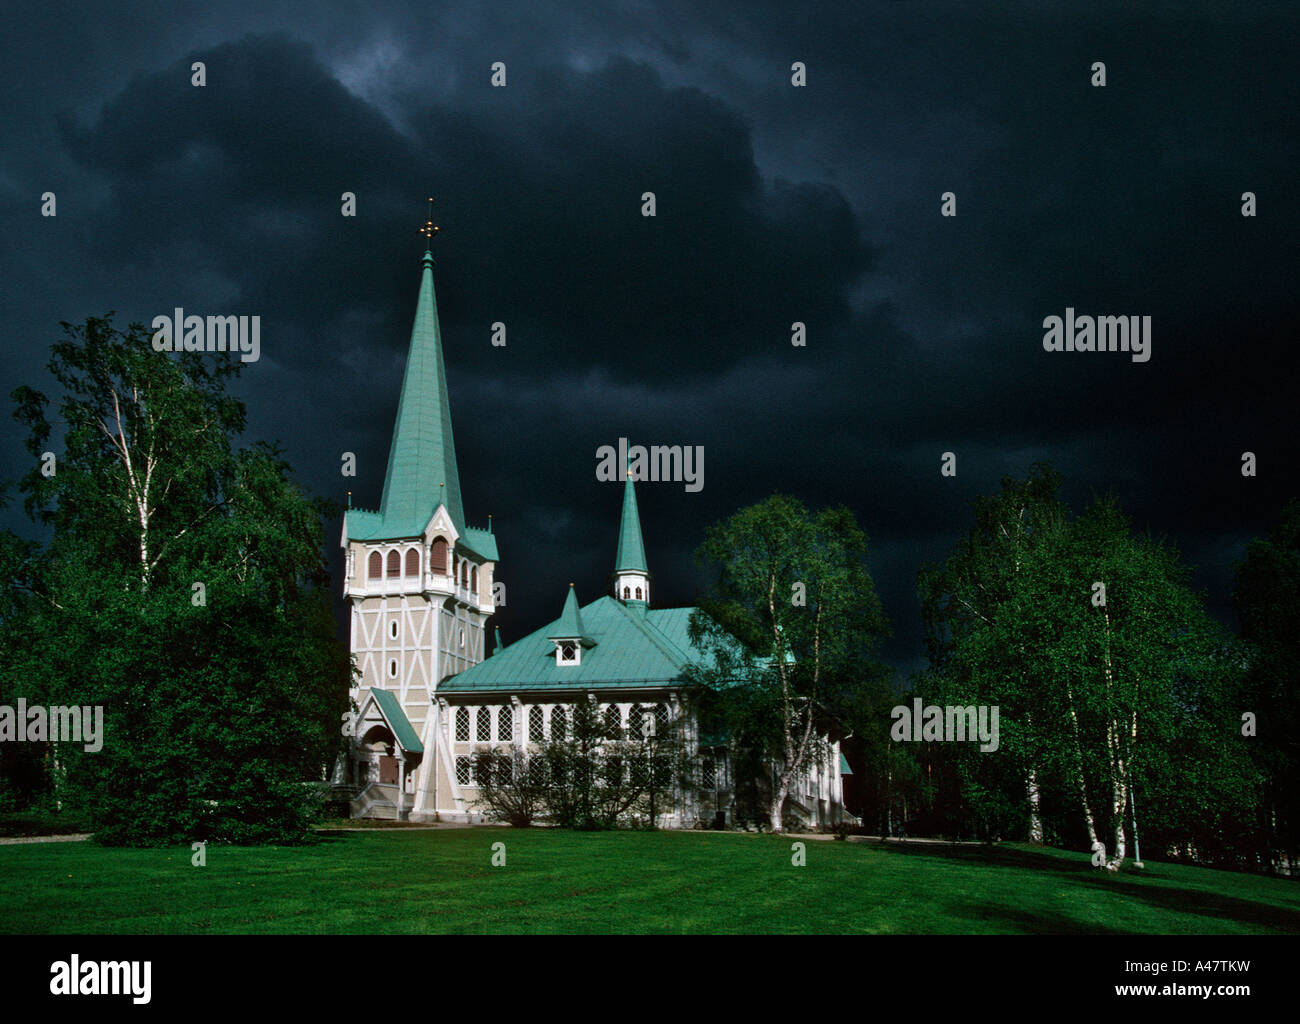 Dramatic black clouds gather behind a traditional wooden church in the high arctic Swedish town of Jokkmokk Stock Photo